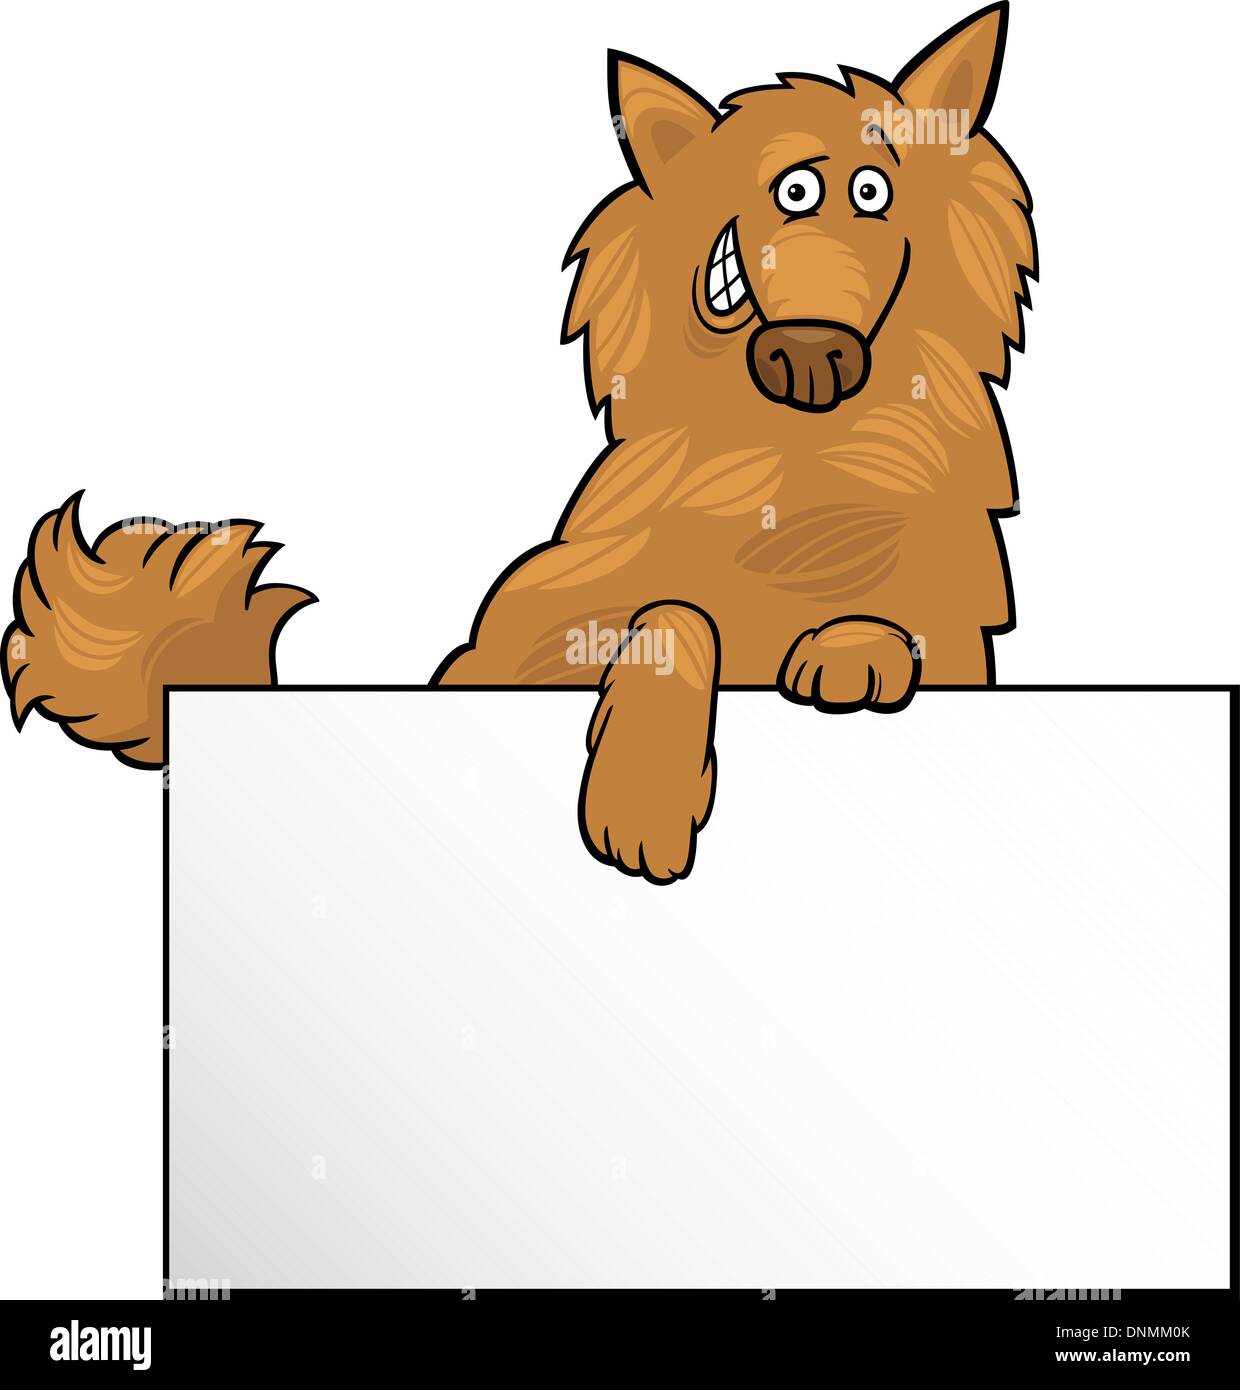 Cartoon Illustration of Funny Shaggy Dog with White Card or Board Greeting or Business Card Design Stock Vector